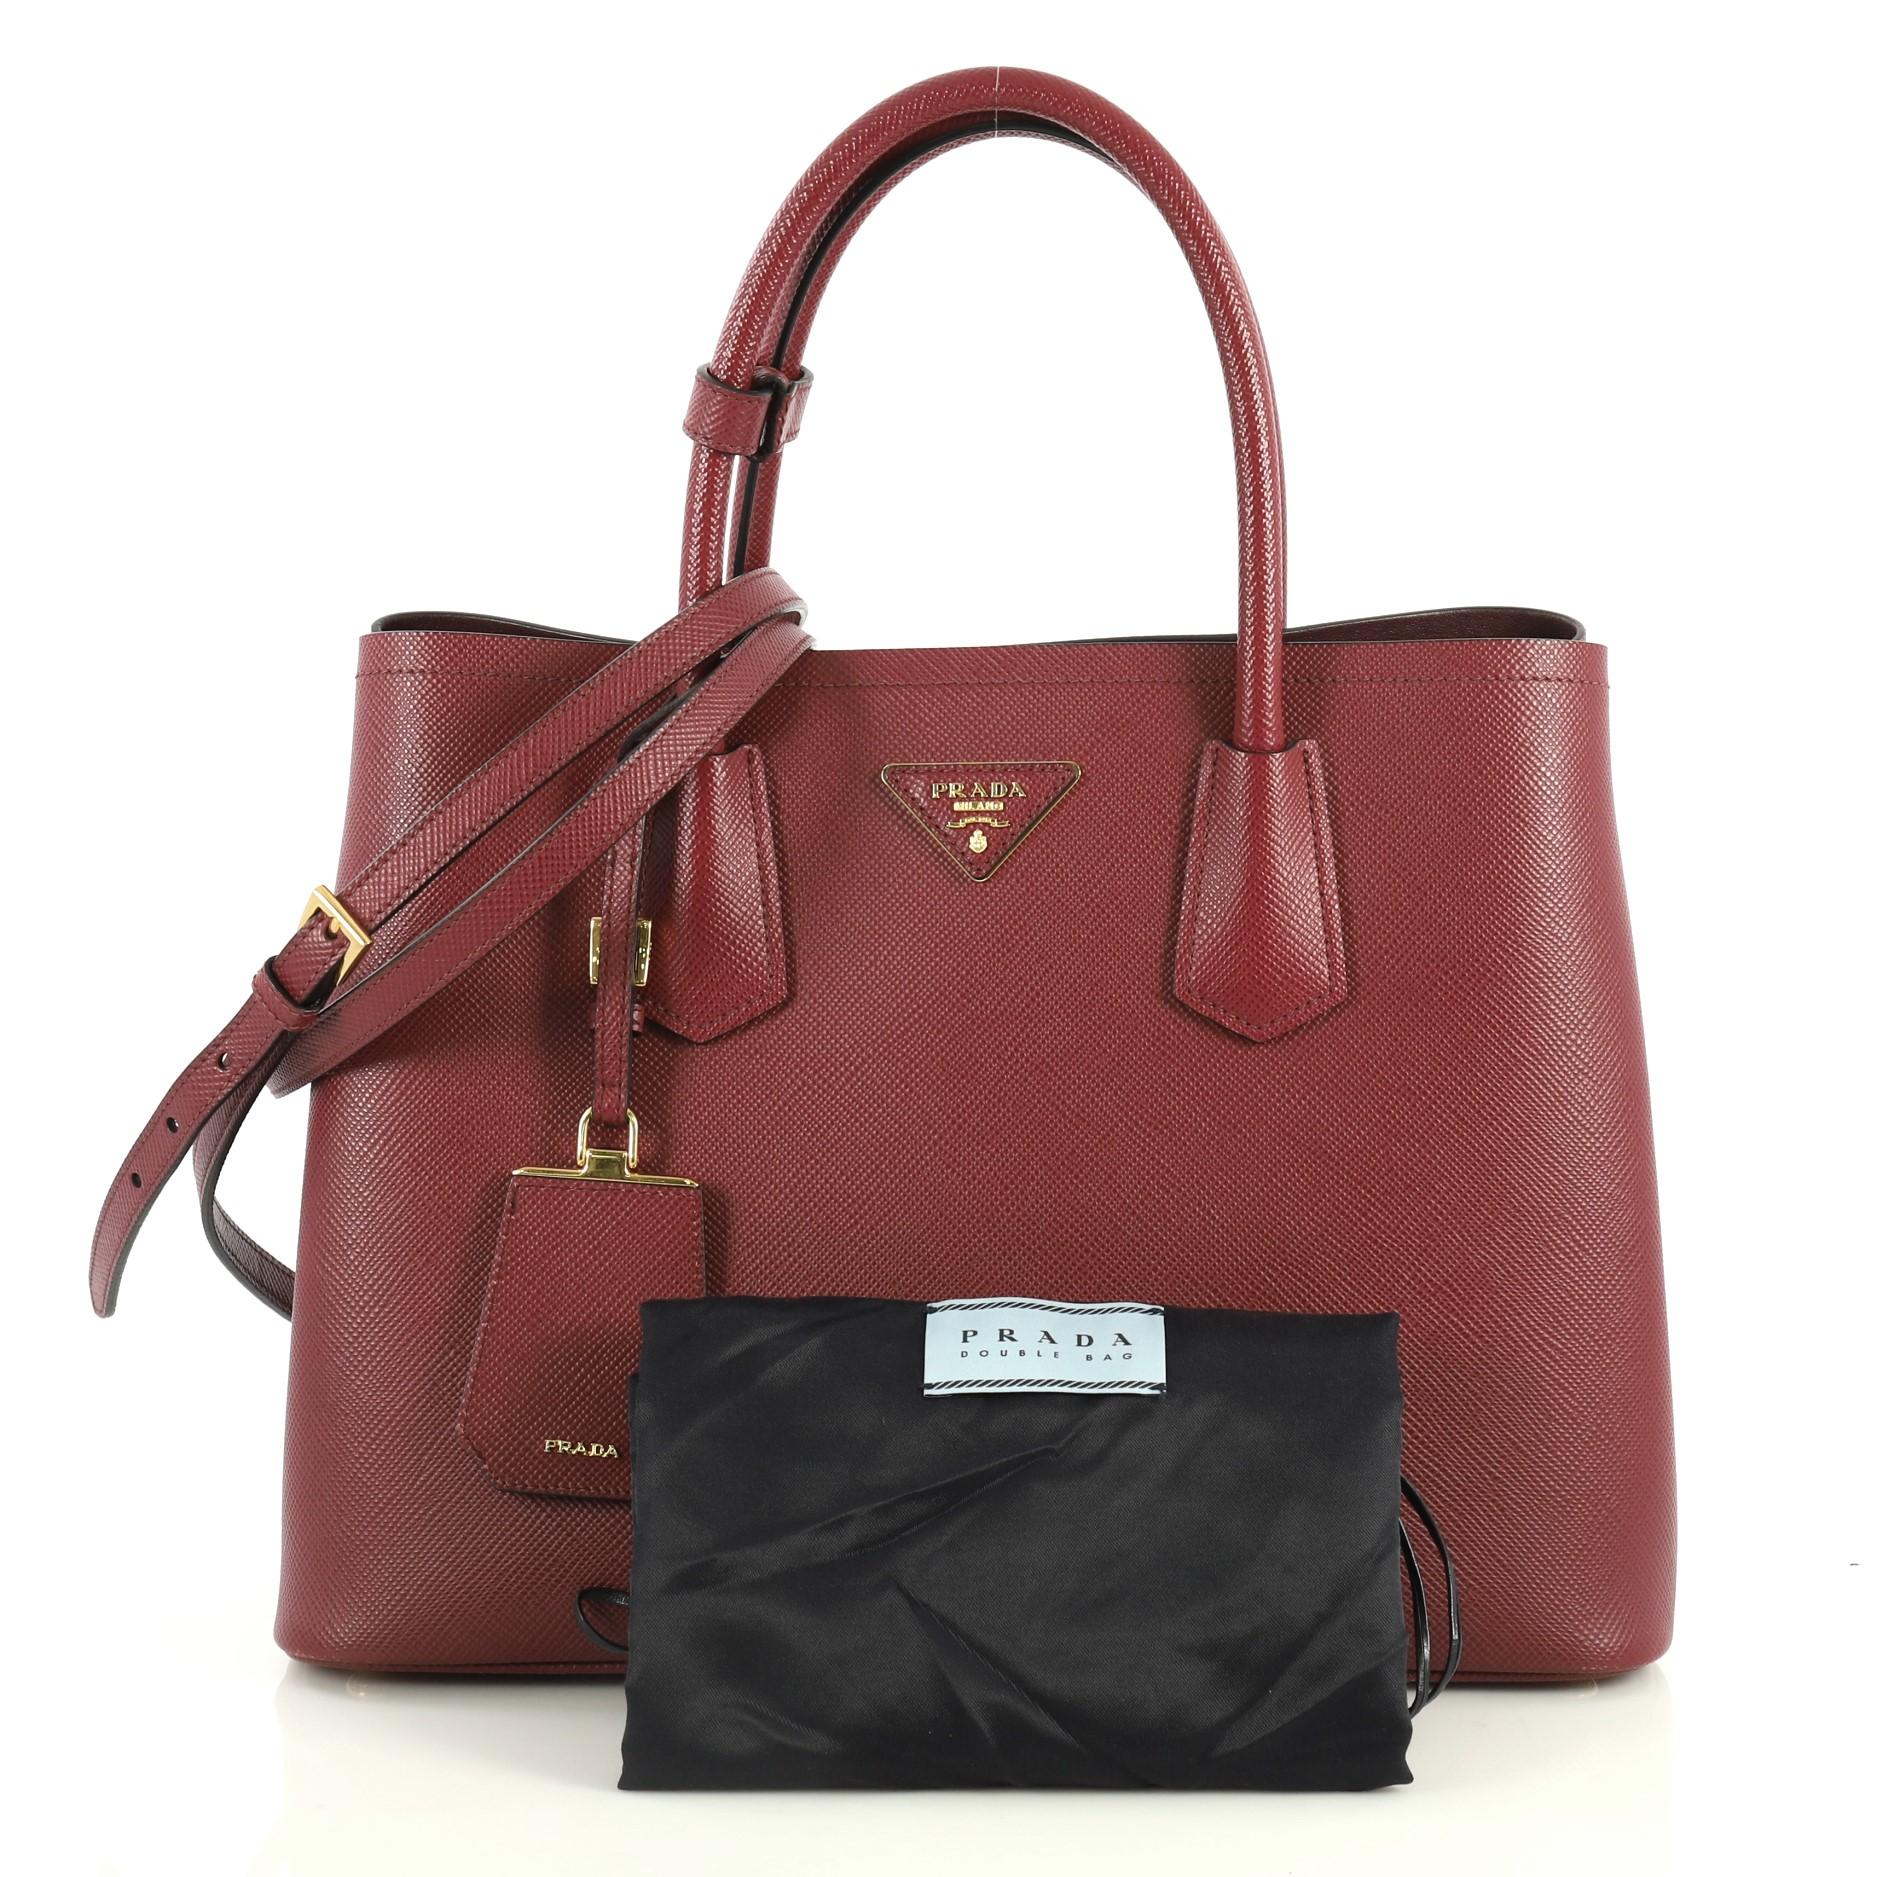 This Prada Cuir Double Tote Saffiano Leather Medium, crafted from red saffiano leather, features dual rolled handles, triangle logo at the center, and gold-tone hardware. It opens to a red leather interior with middle flap compartment. 

Estimated